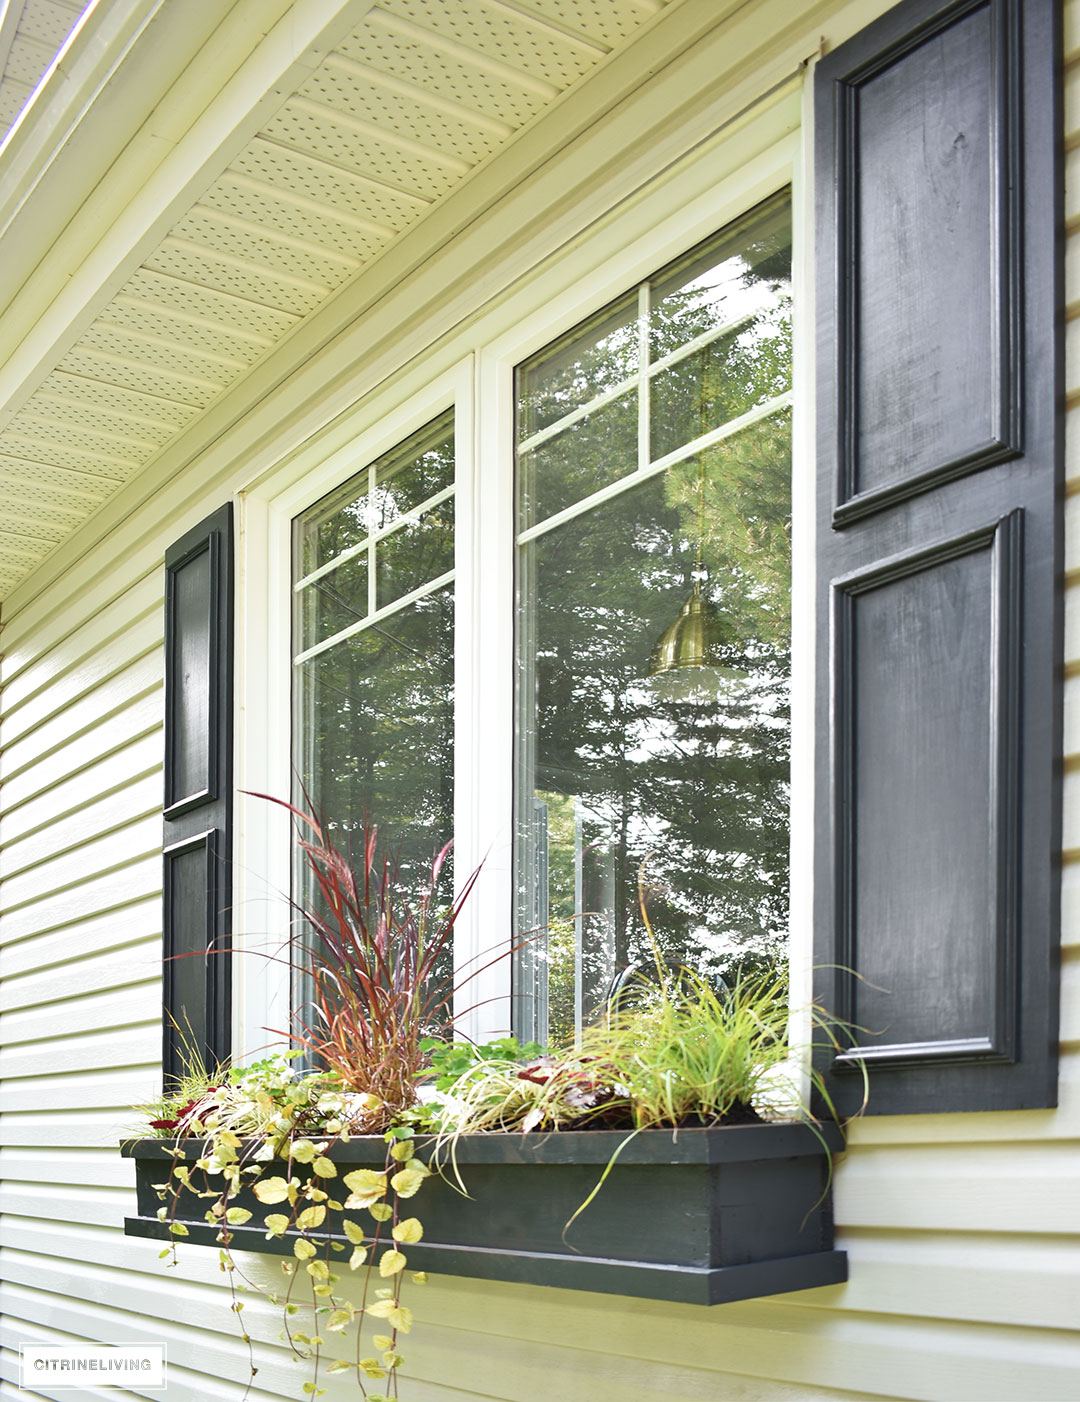 DIY black shutters and window boxes add character to this window.